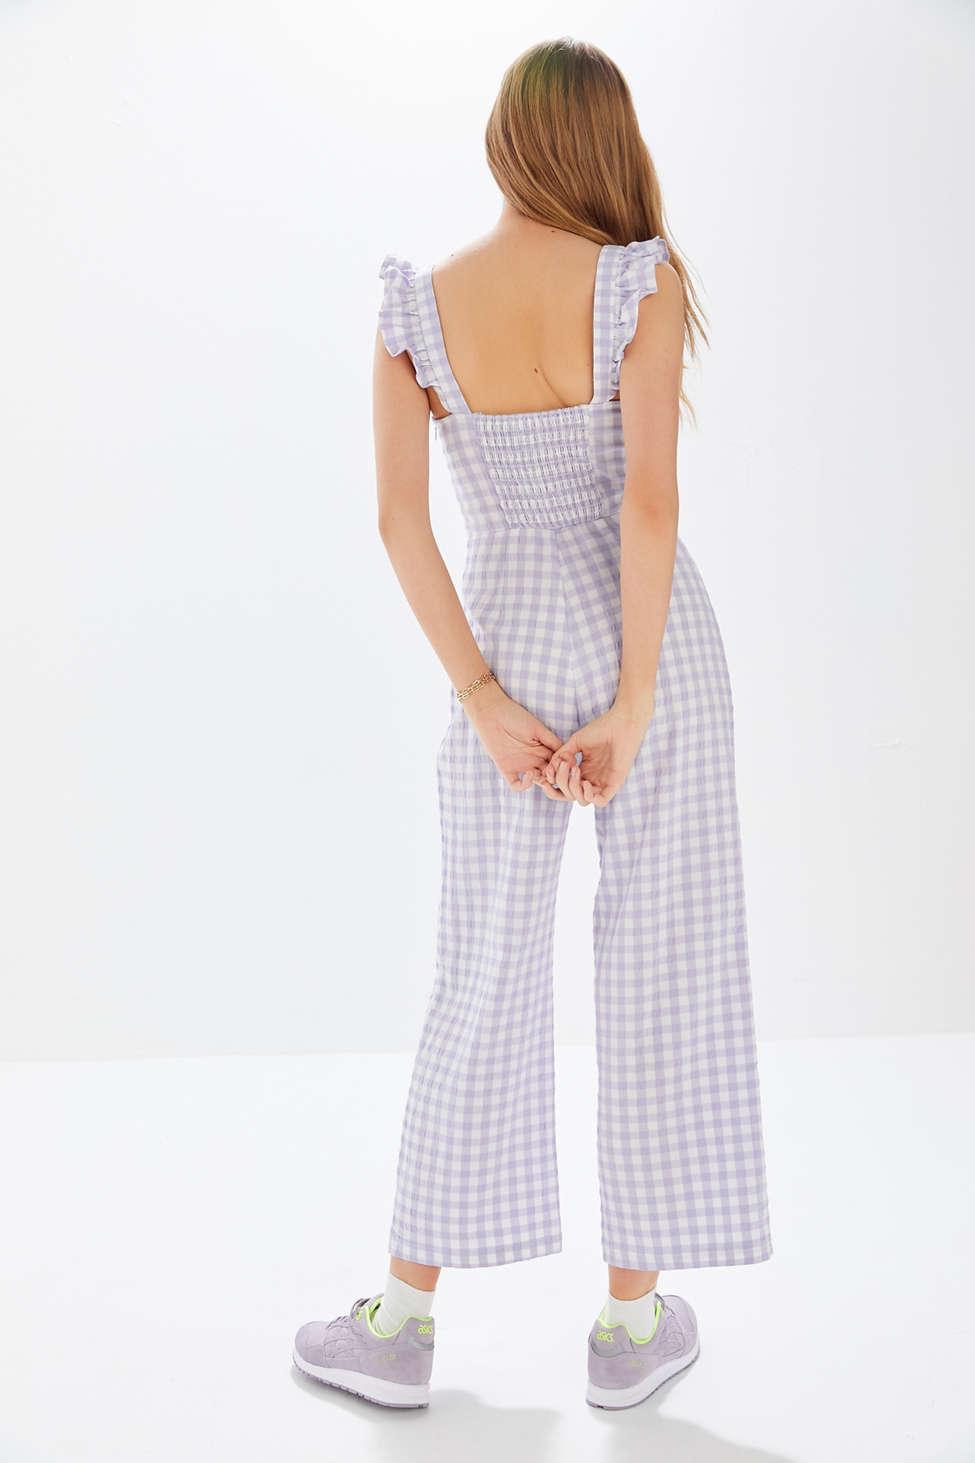 urban outfitters purple jumpsuit